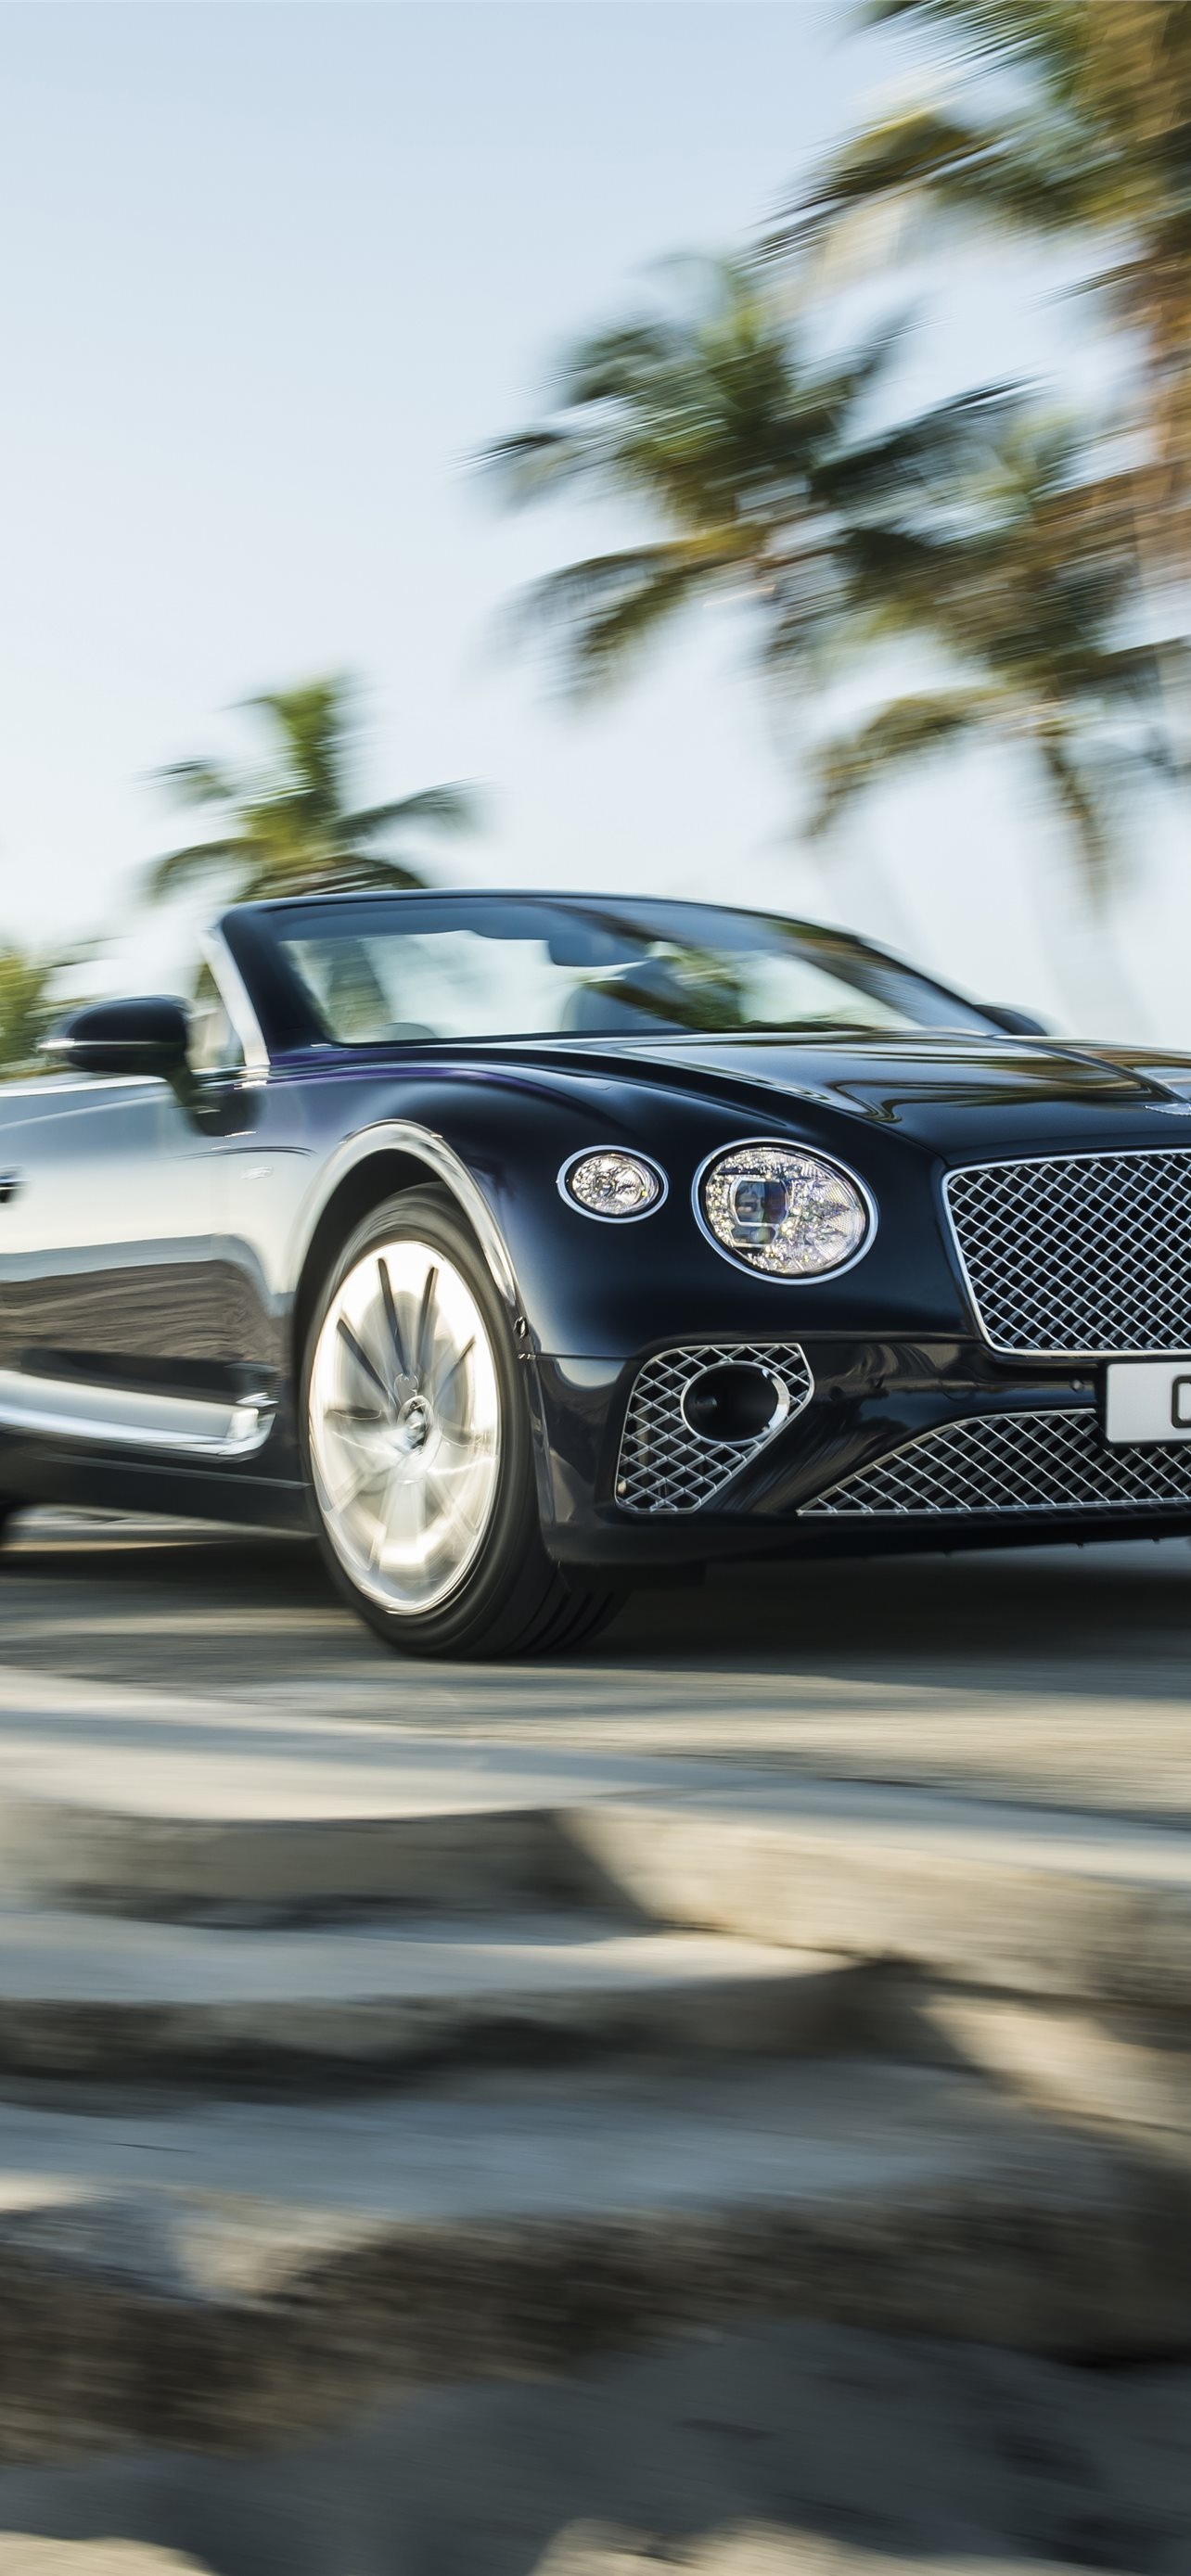 Bentley Continental GTC, iPhone wallpapers, Luxury car, Free download, 1290x2780 HD Phone